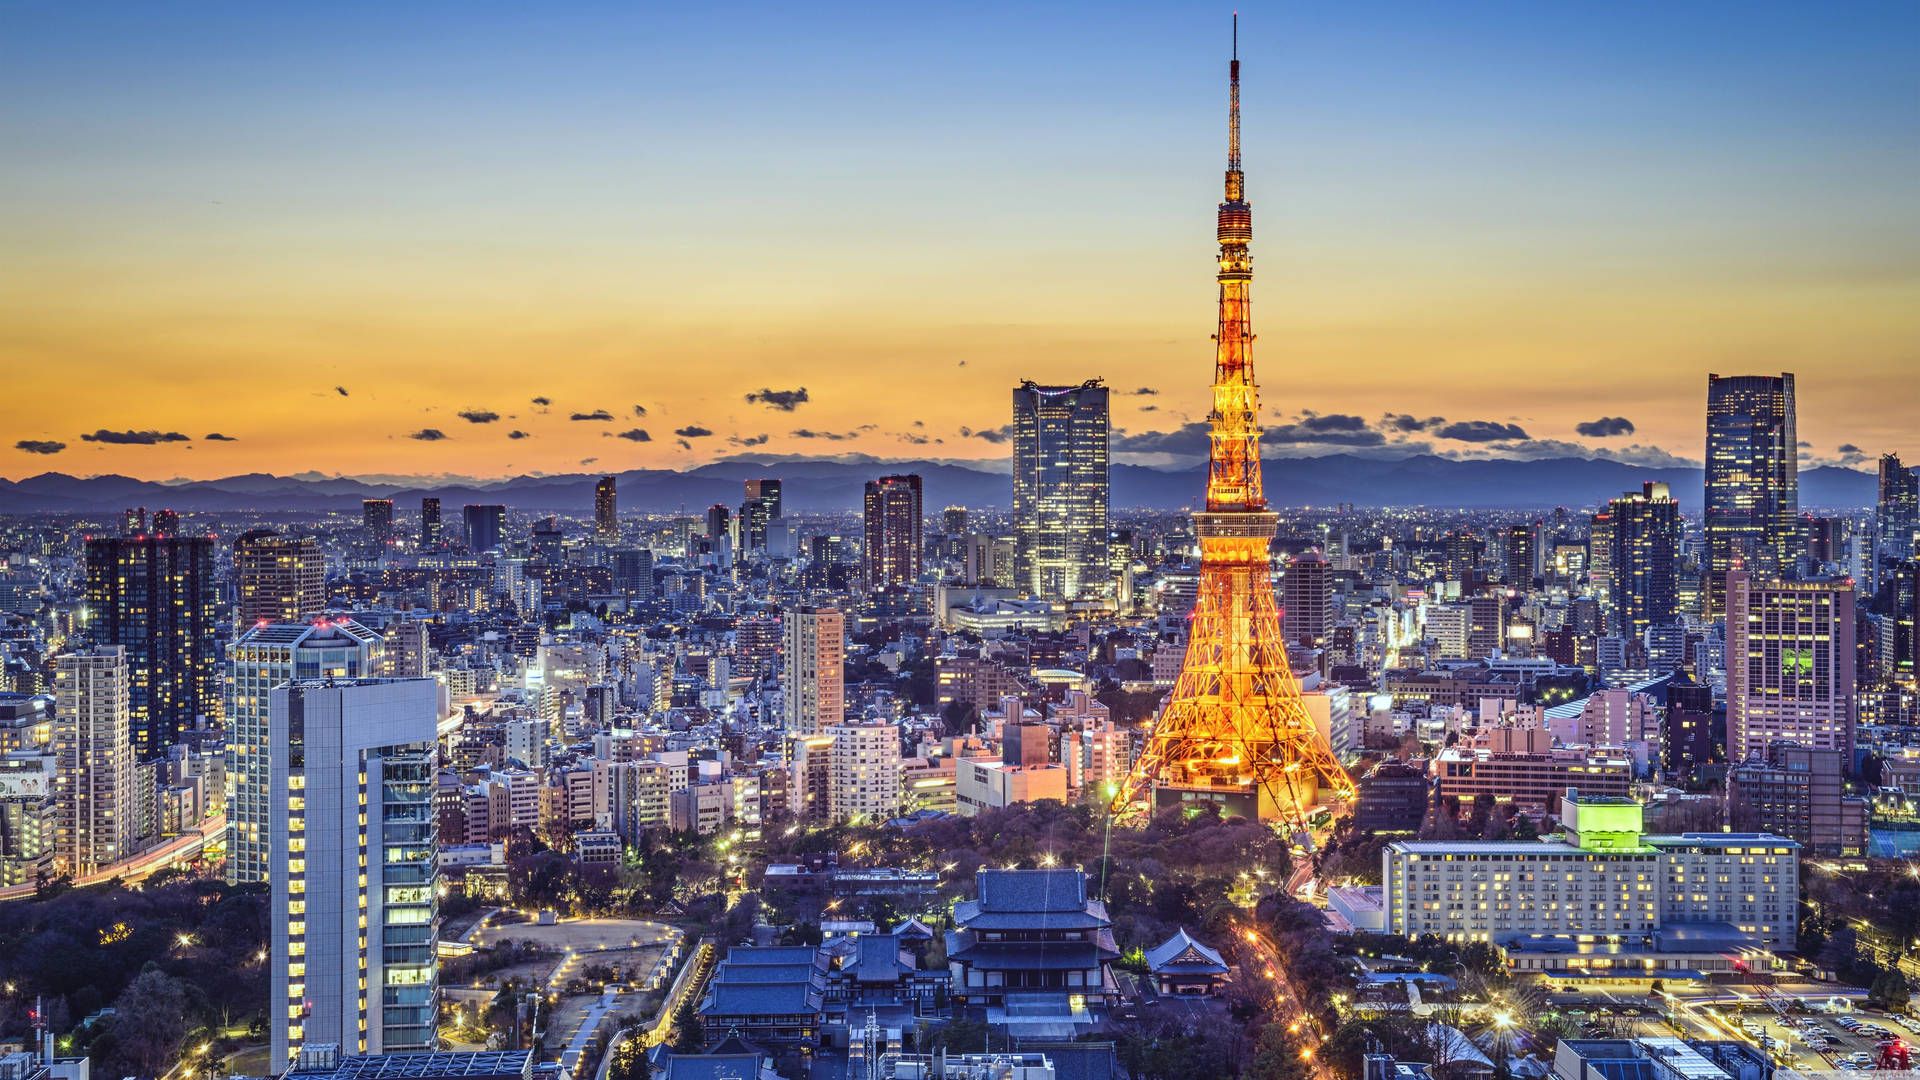 A city skyline with the tokyo tower in it - Tokyo